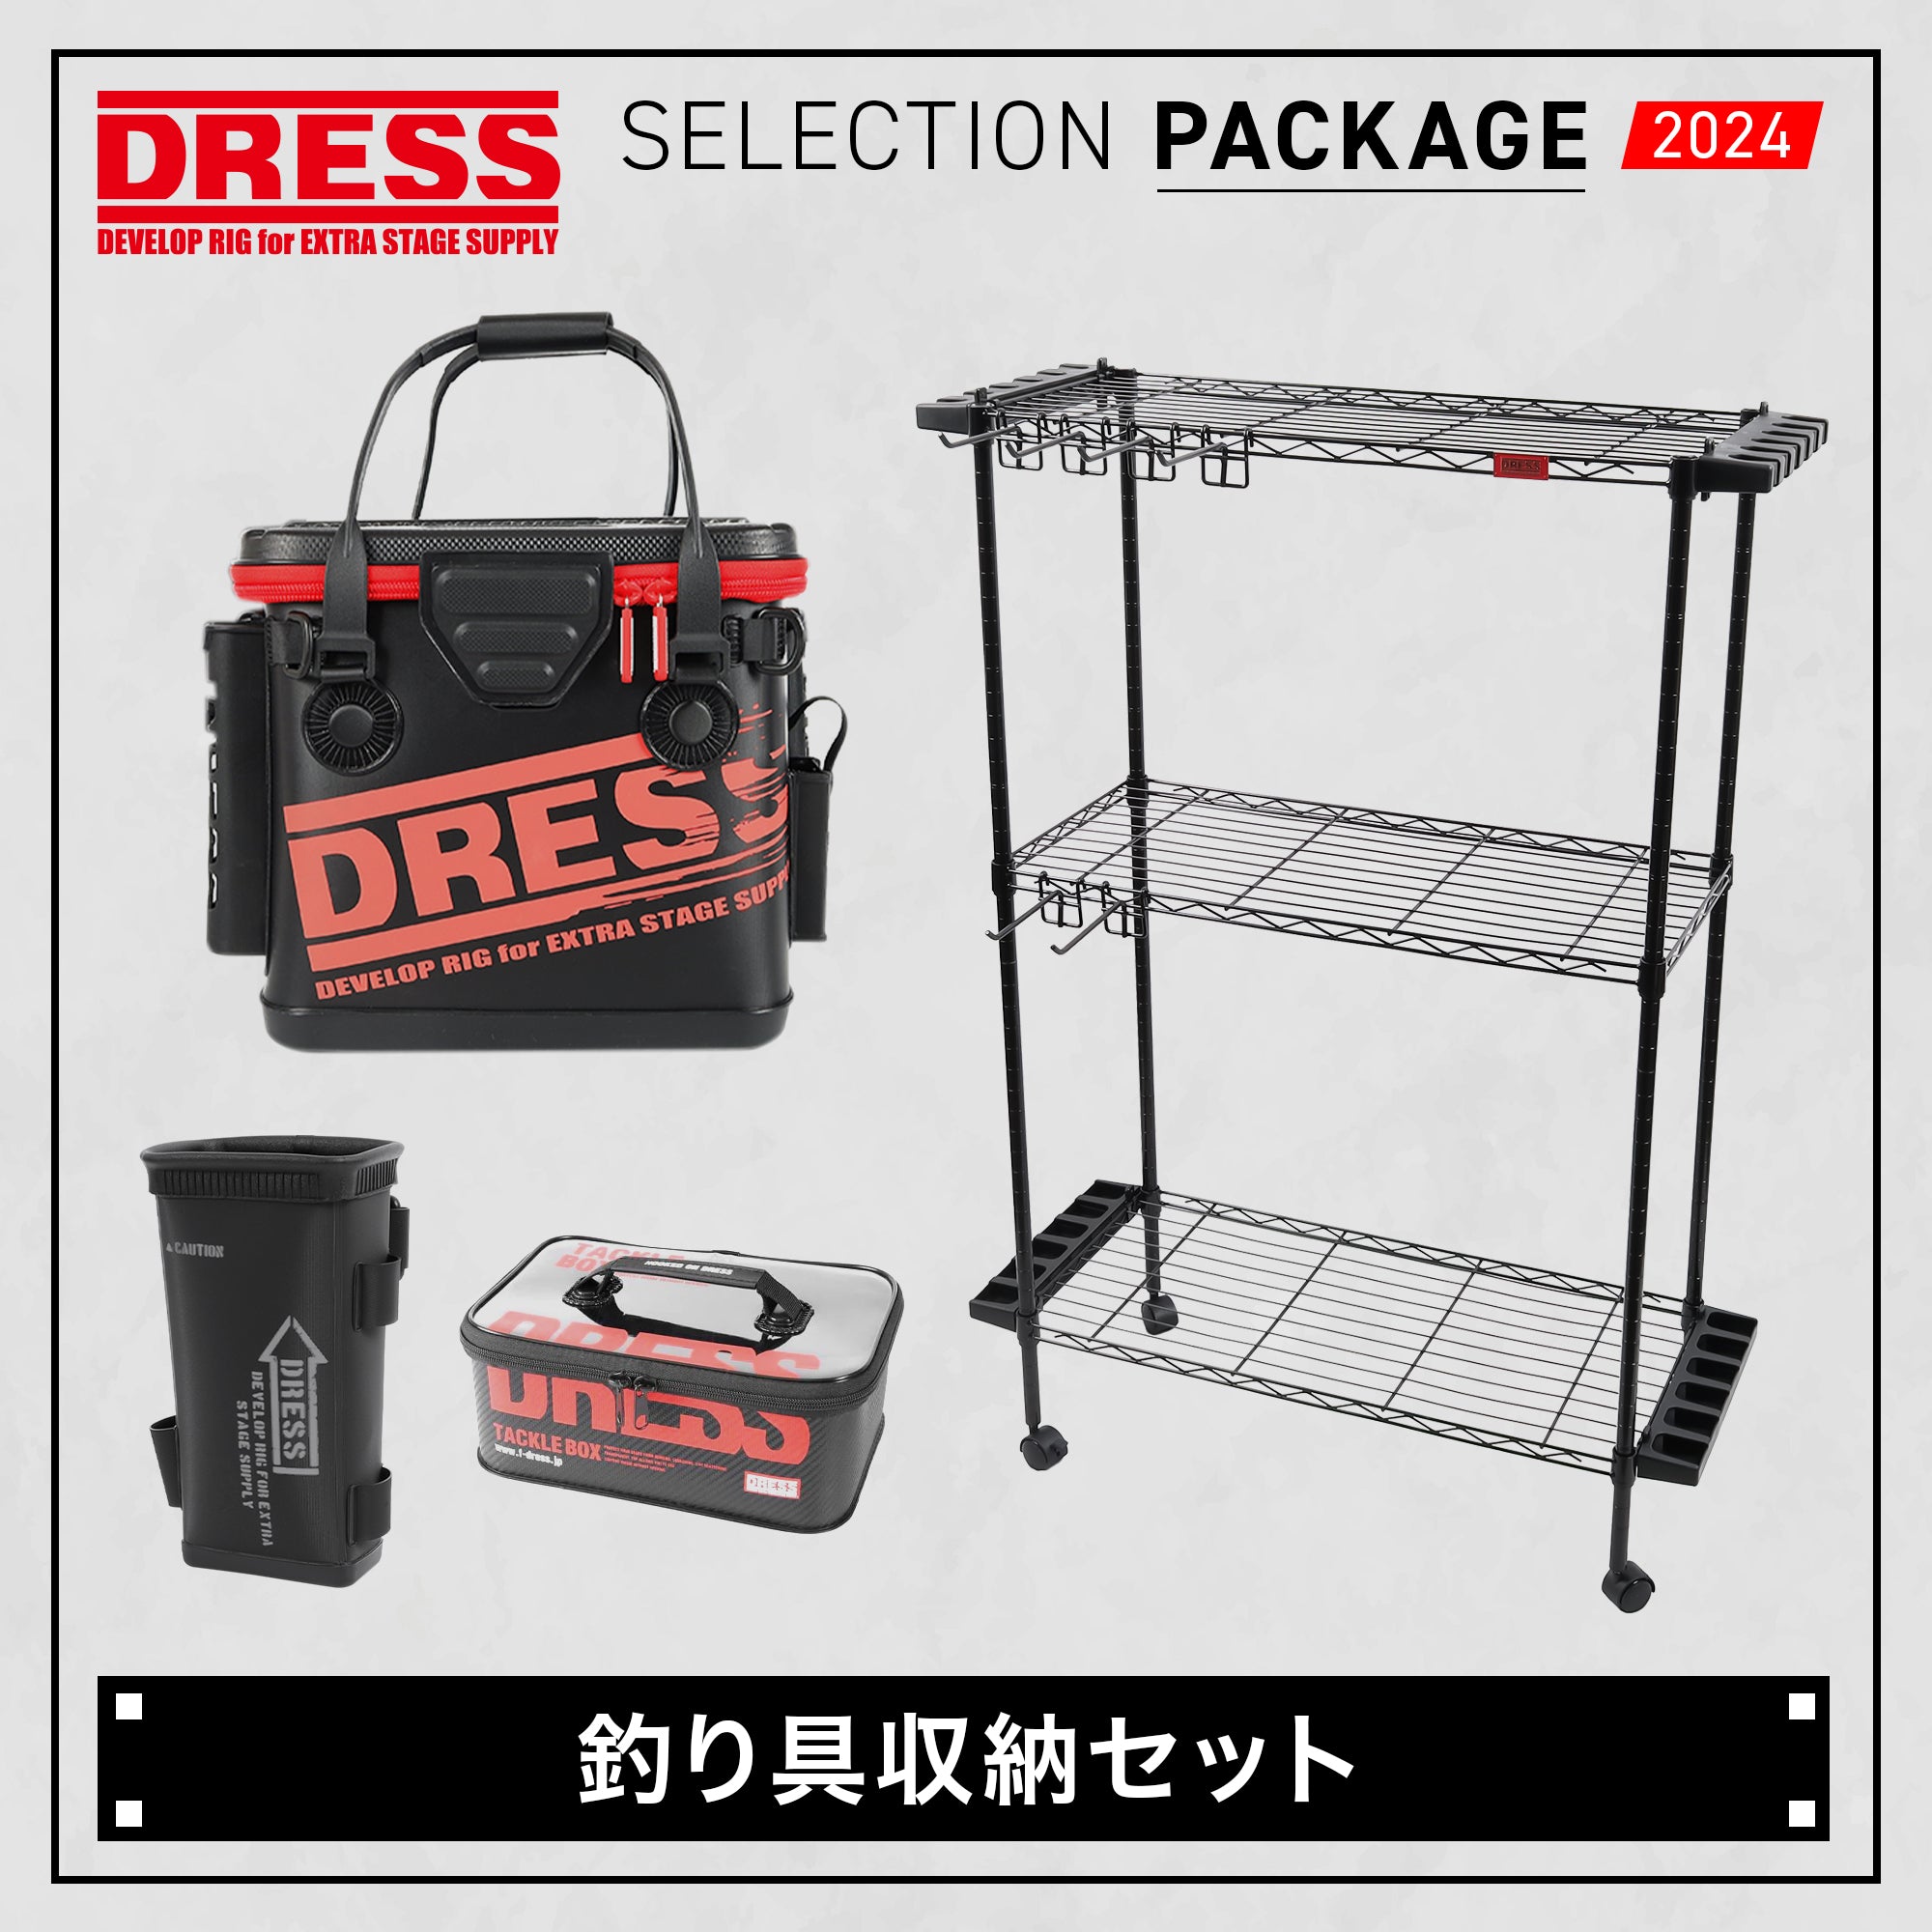 【SELECTION PACKAGE 2024】釣り具収納セット